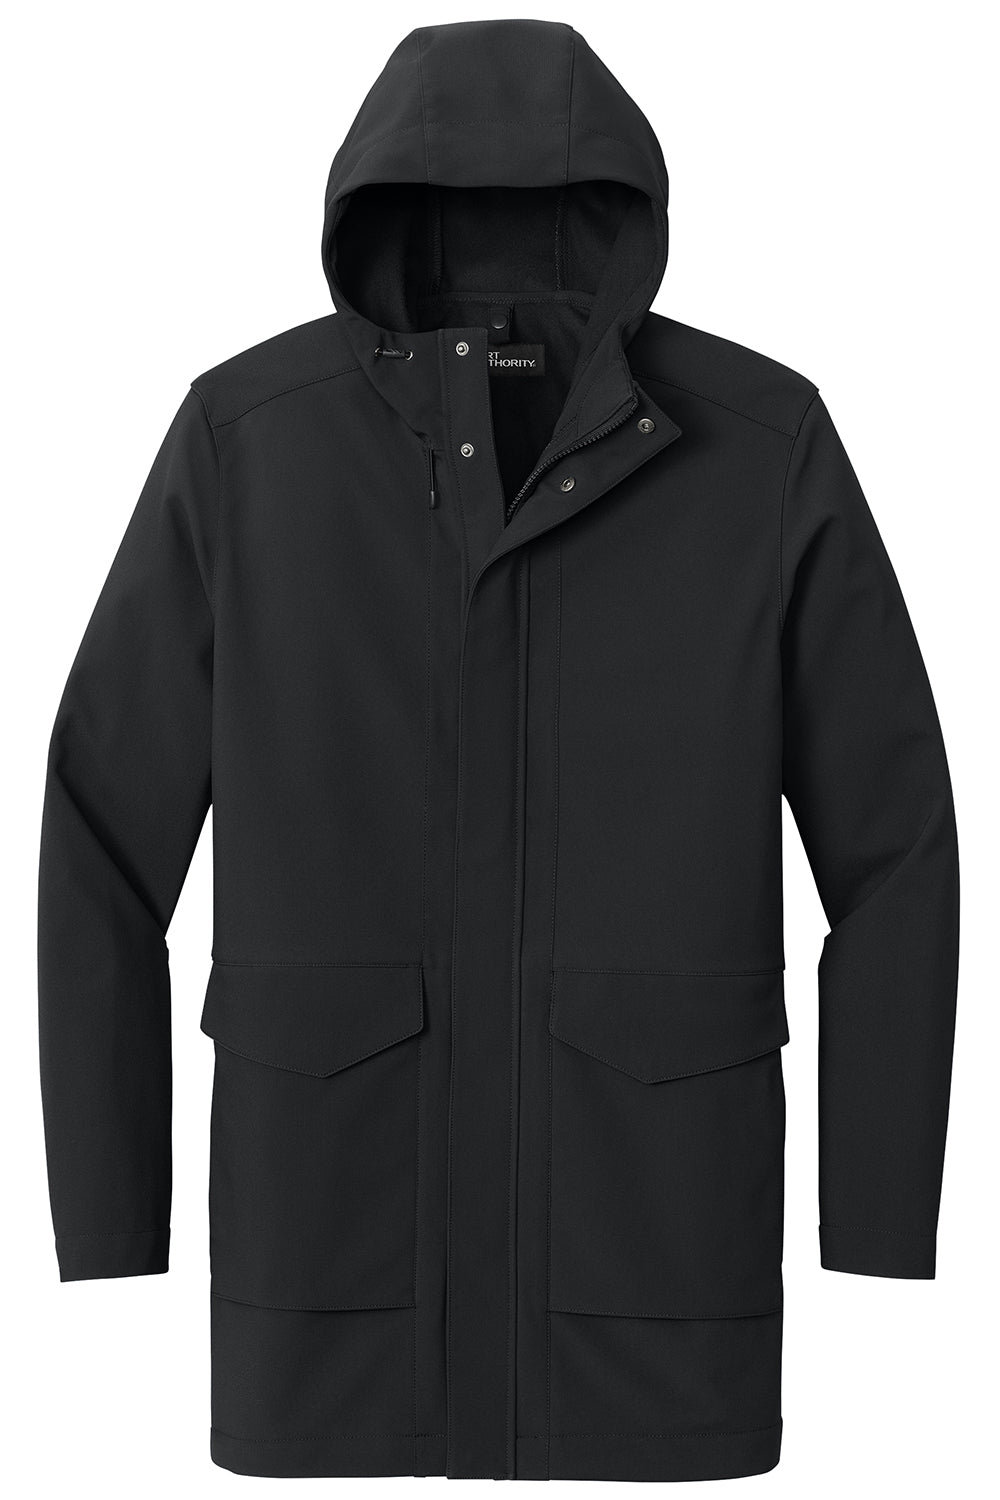 Port Authority J919 Mens Collective Full Zip Hooded Parka Deep Black Flat Front